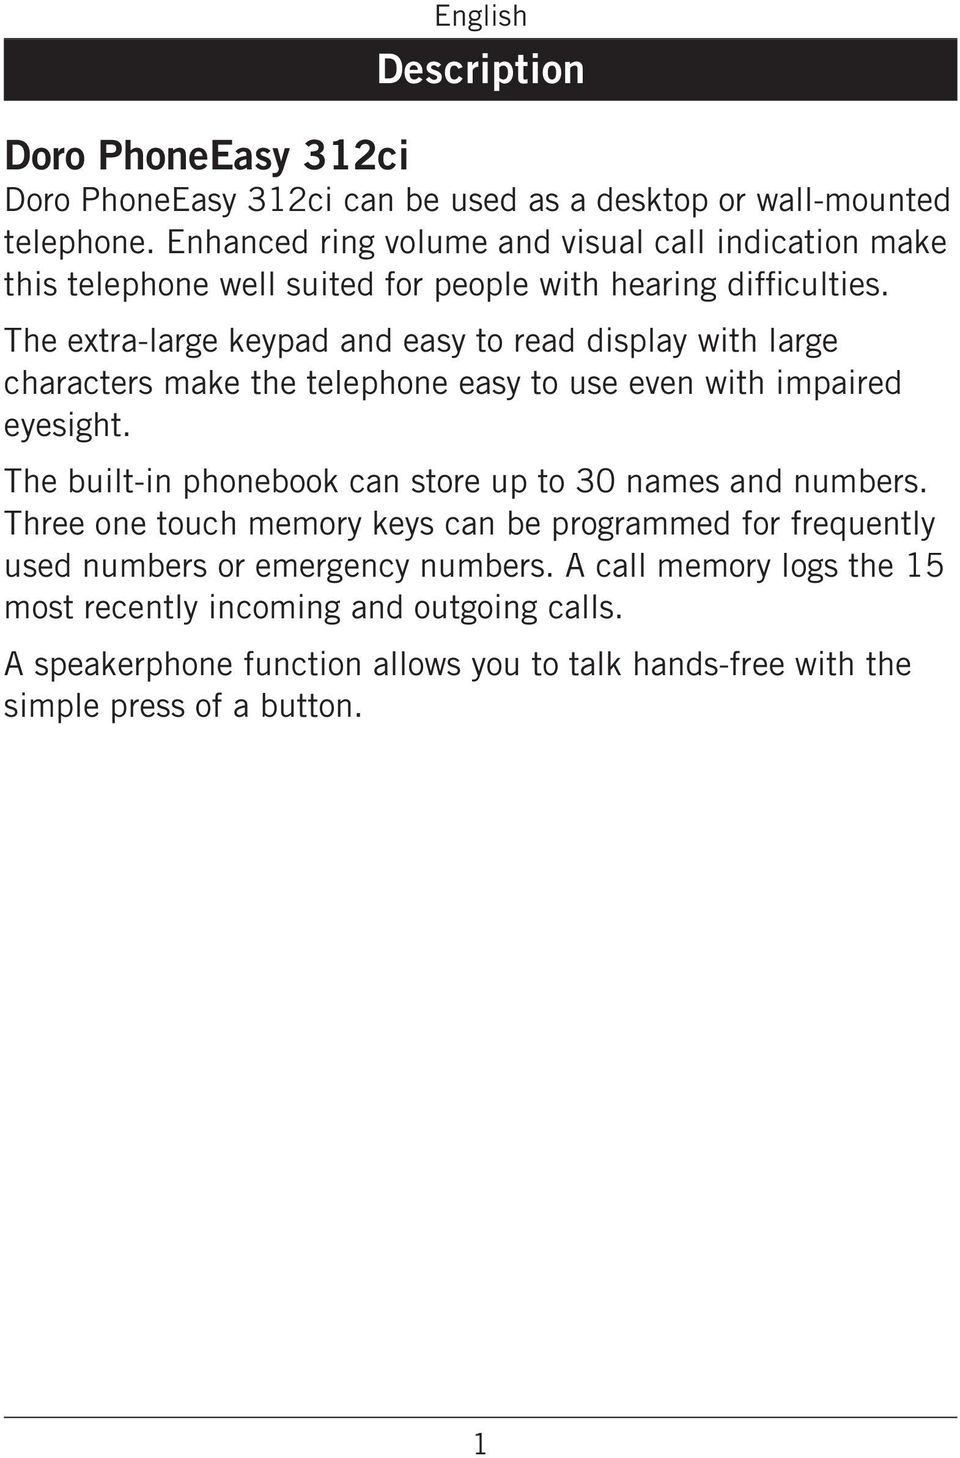 even with impaired eyesight The built-in phonebook can store up to 30 names and numbers Three one touch memory keys can be programmed for frequently used numbers or